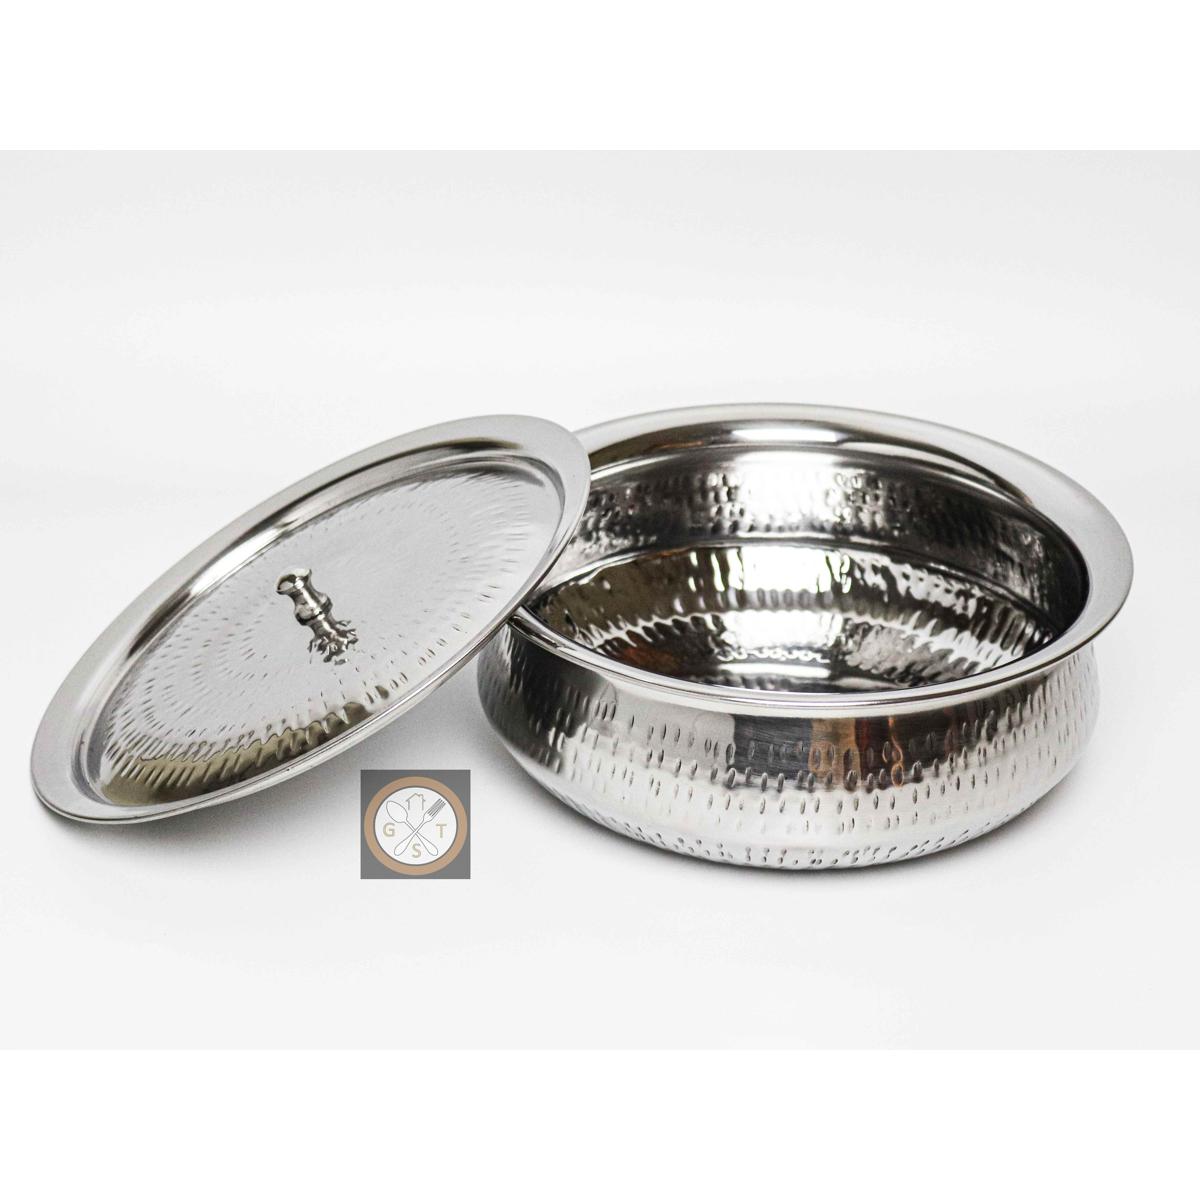 Stainless Steel Serving Dish 10inch Width (2.5litre Capacity)